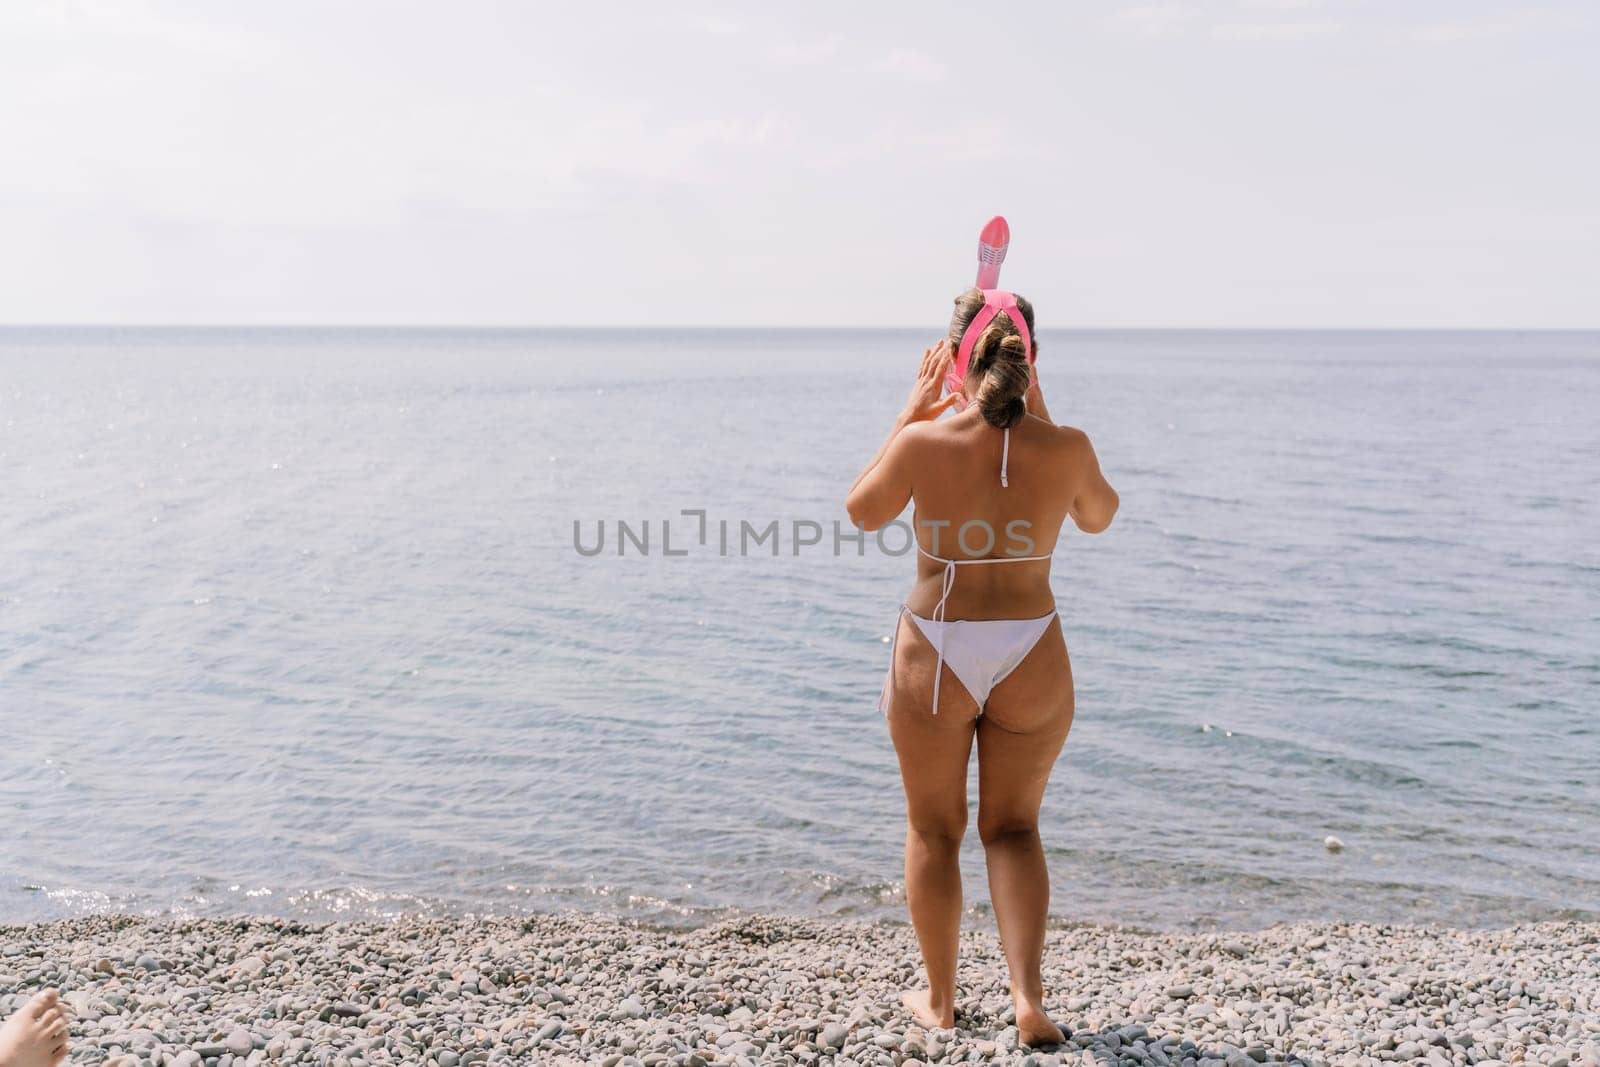 A woman in a bikini stands on a beach, looking out at the ocean. She is holding a pink snorkel and she is enjoying the view